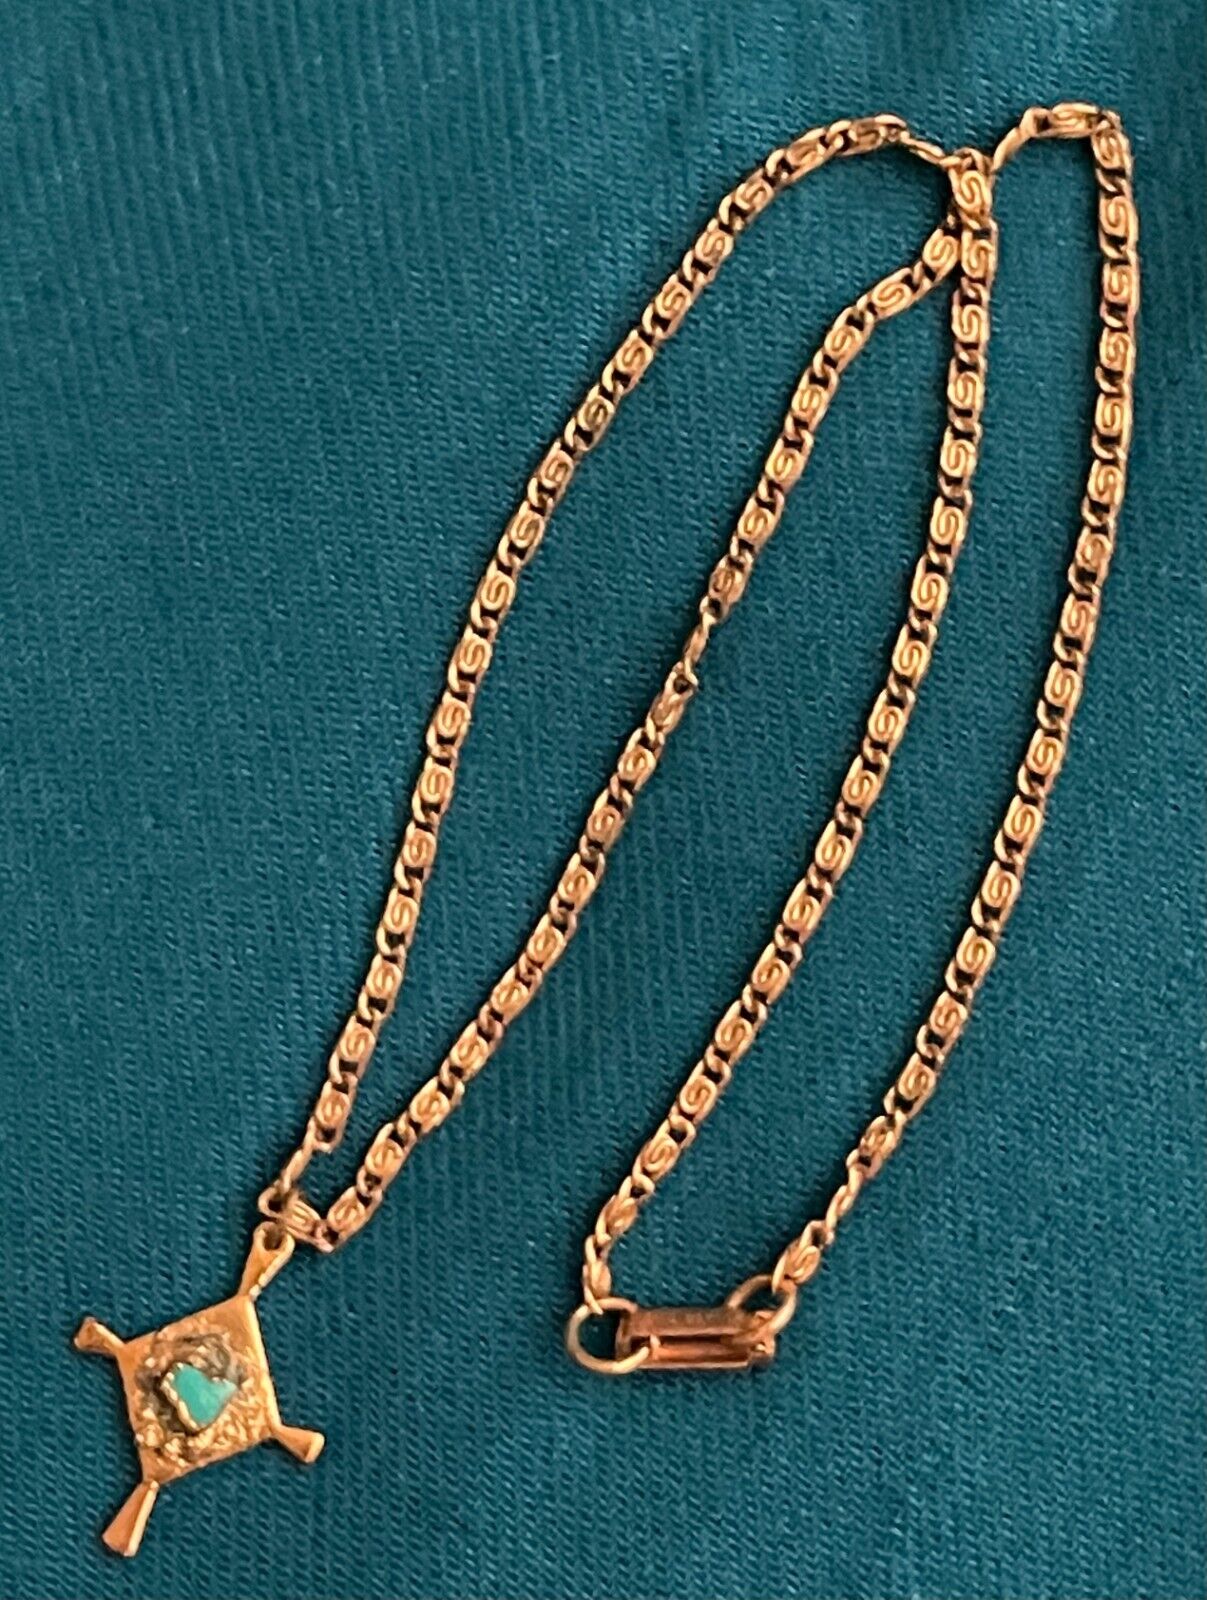 COPPER BELL CROSS NECKLACE  VINTAGE FRED HARVEY RT 66 NATIVE AMERICAN STYLE